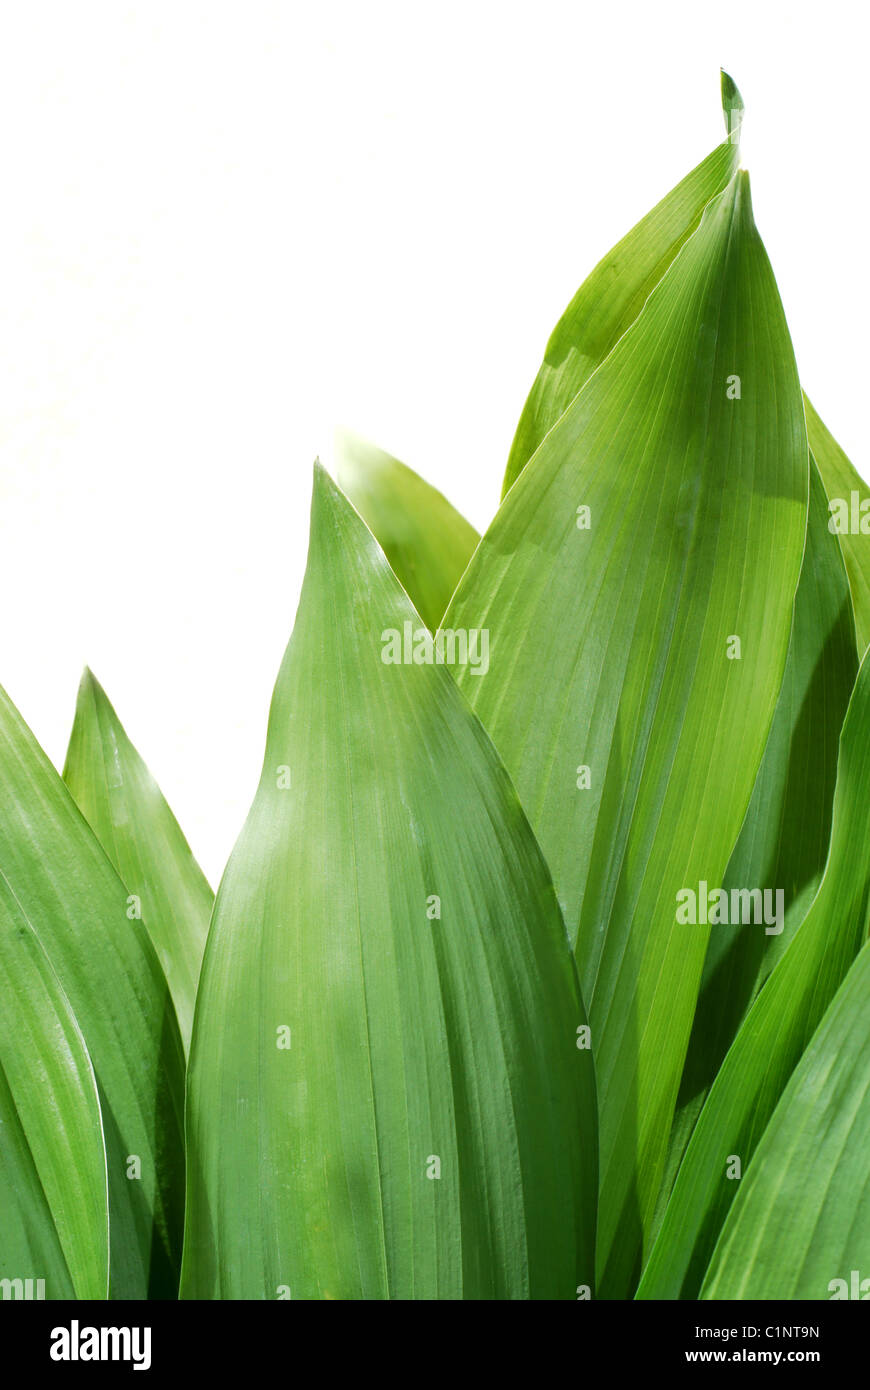 Green leaves photographed on white background (no post work isolation) Stock Photo